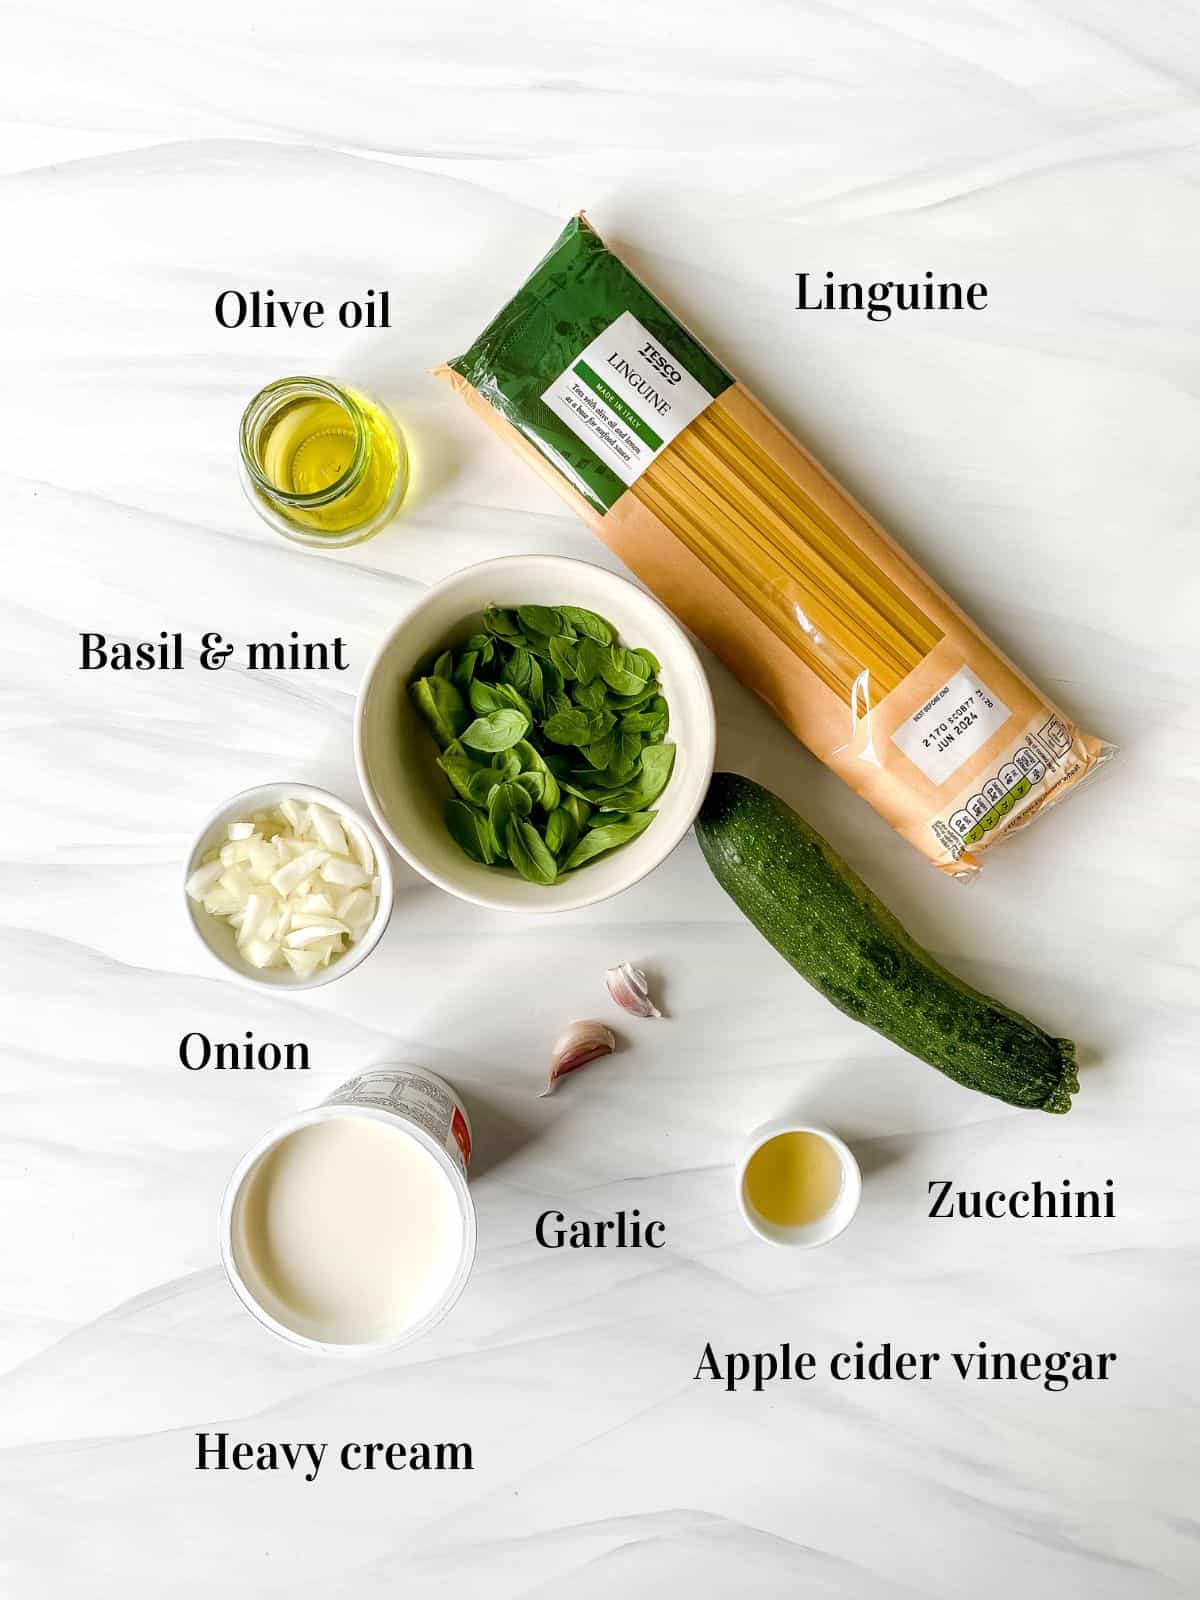 individually labelled ingredients to make zucchini linguine including heavy cream, garlic and herbs.